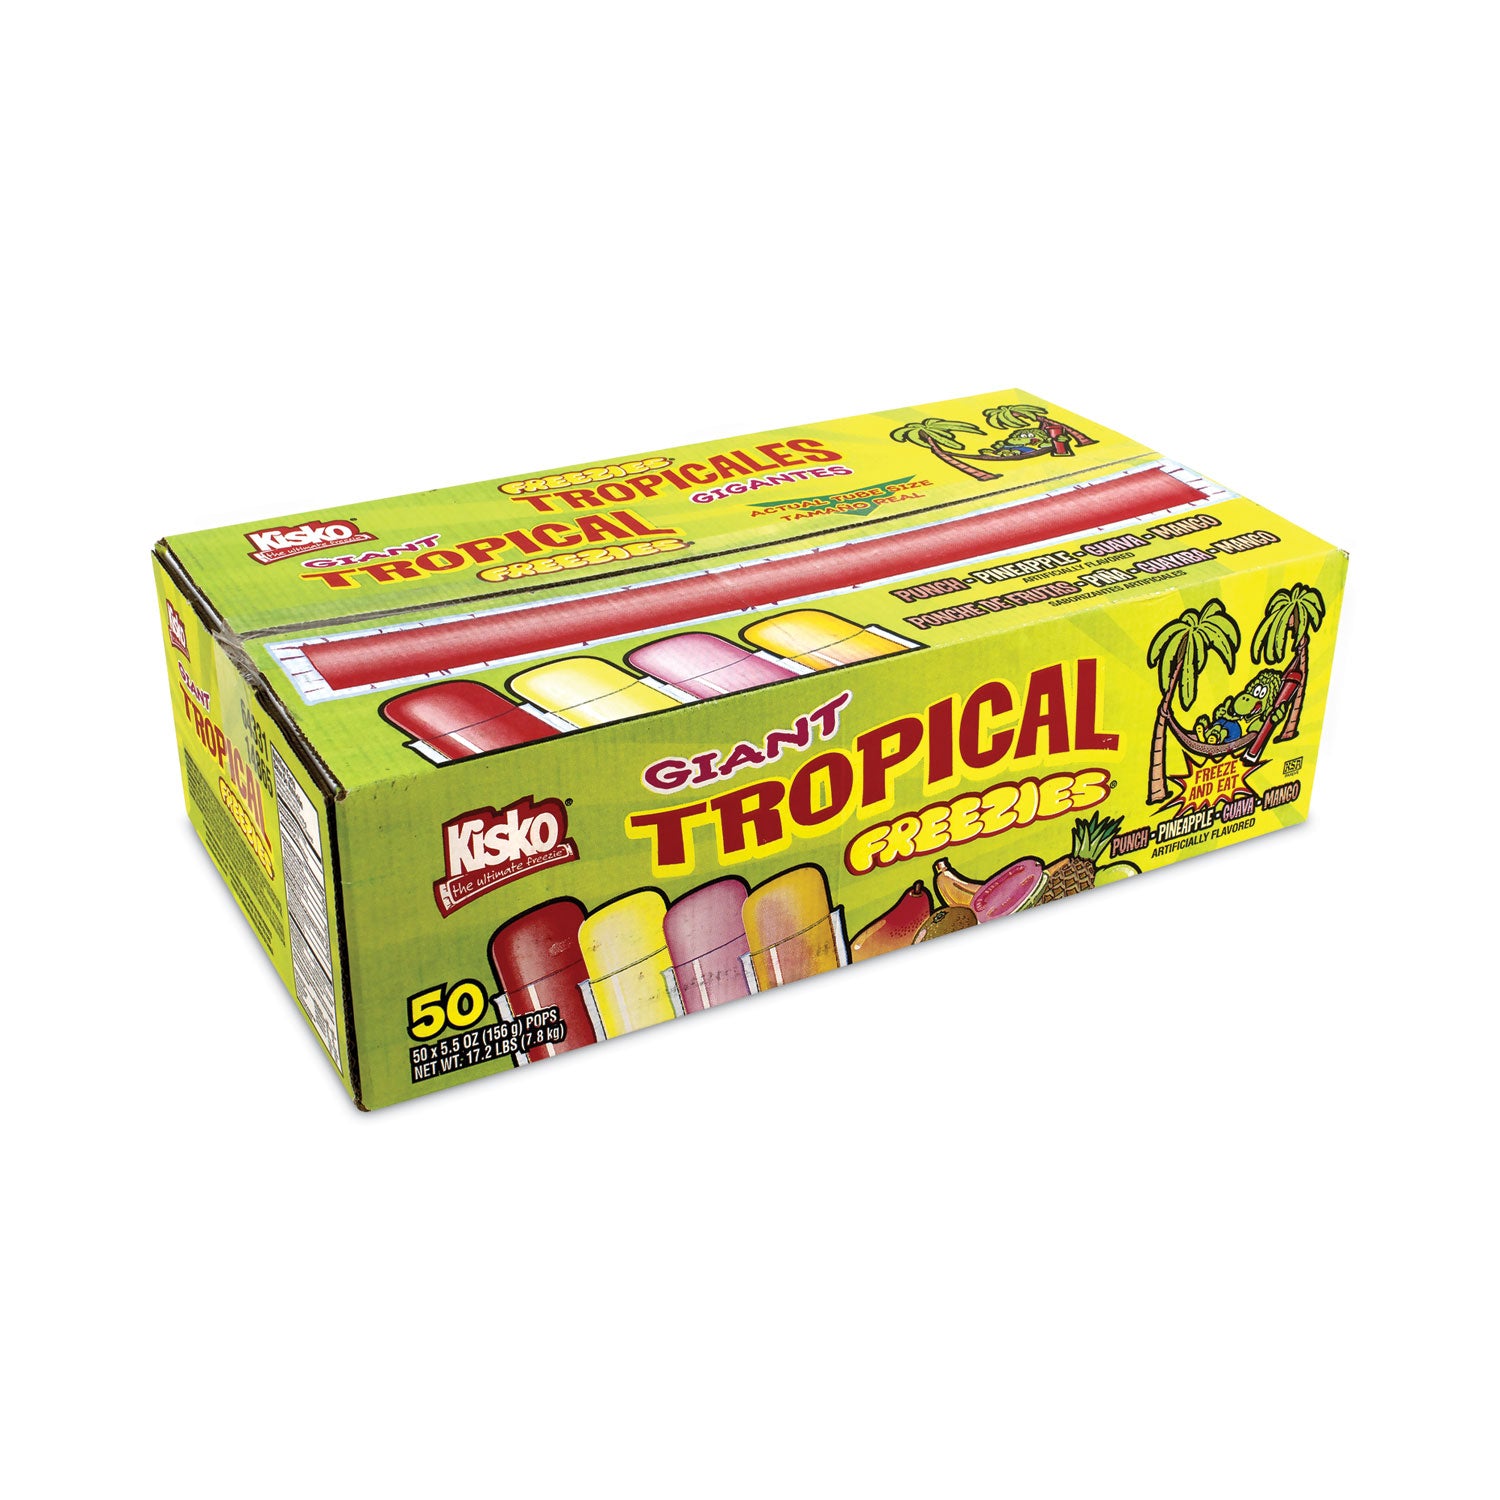 giant-tropical-freezies-ice-pops-55-oz-tube-fruit-punch-guava-mango-pineapple-50-carton-ships-in-1-3-business-days_grr20900478 - 2